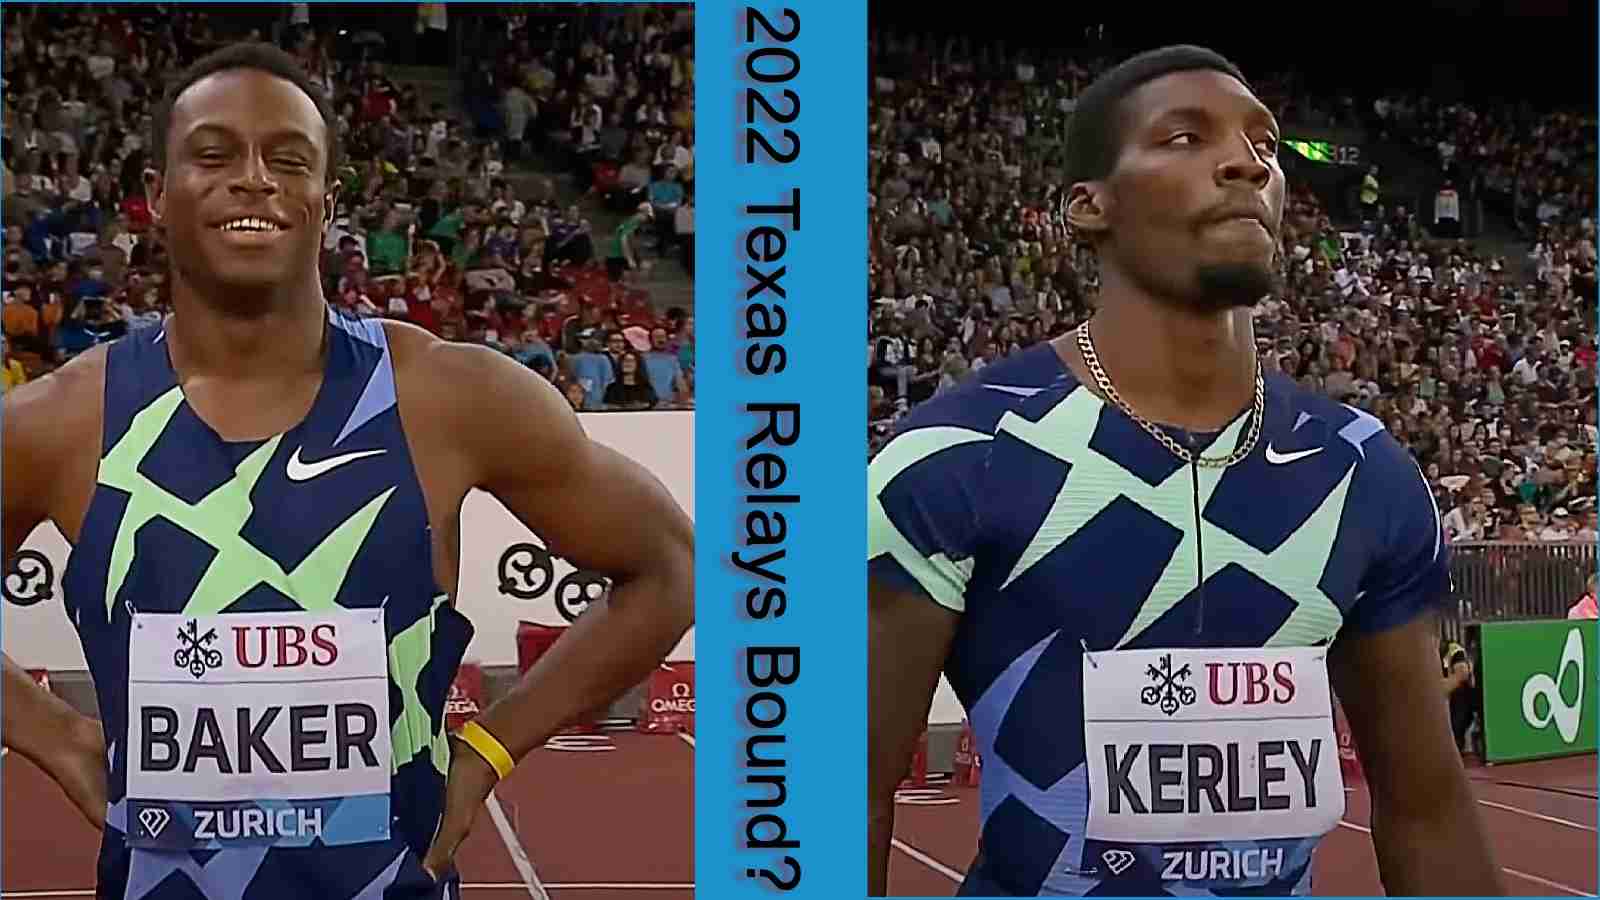 2022-Texas-Relays-Fred-Kerley-and-Ronnie-Baker